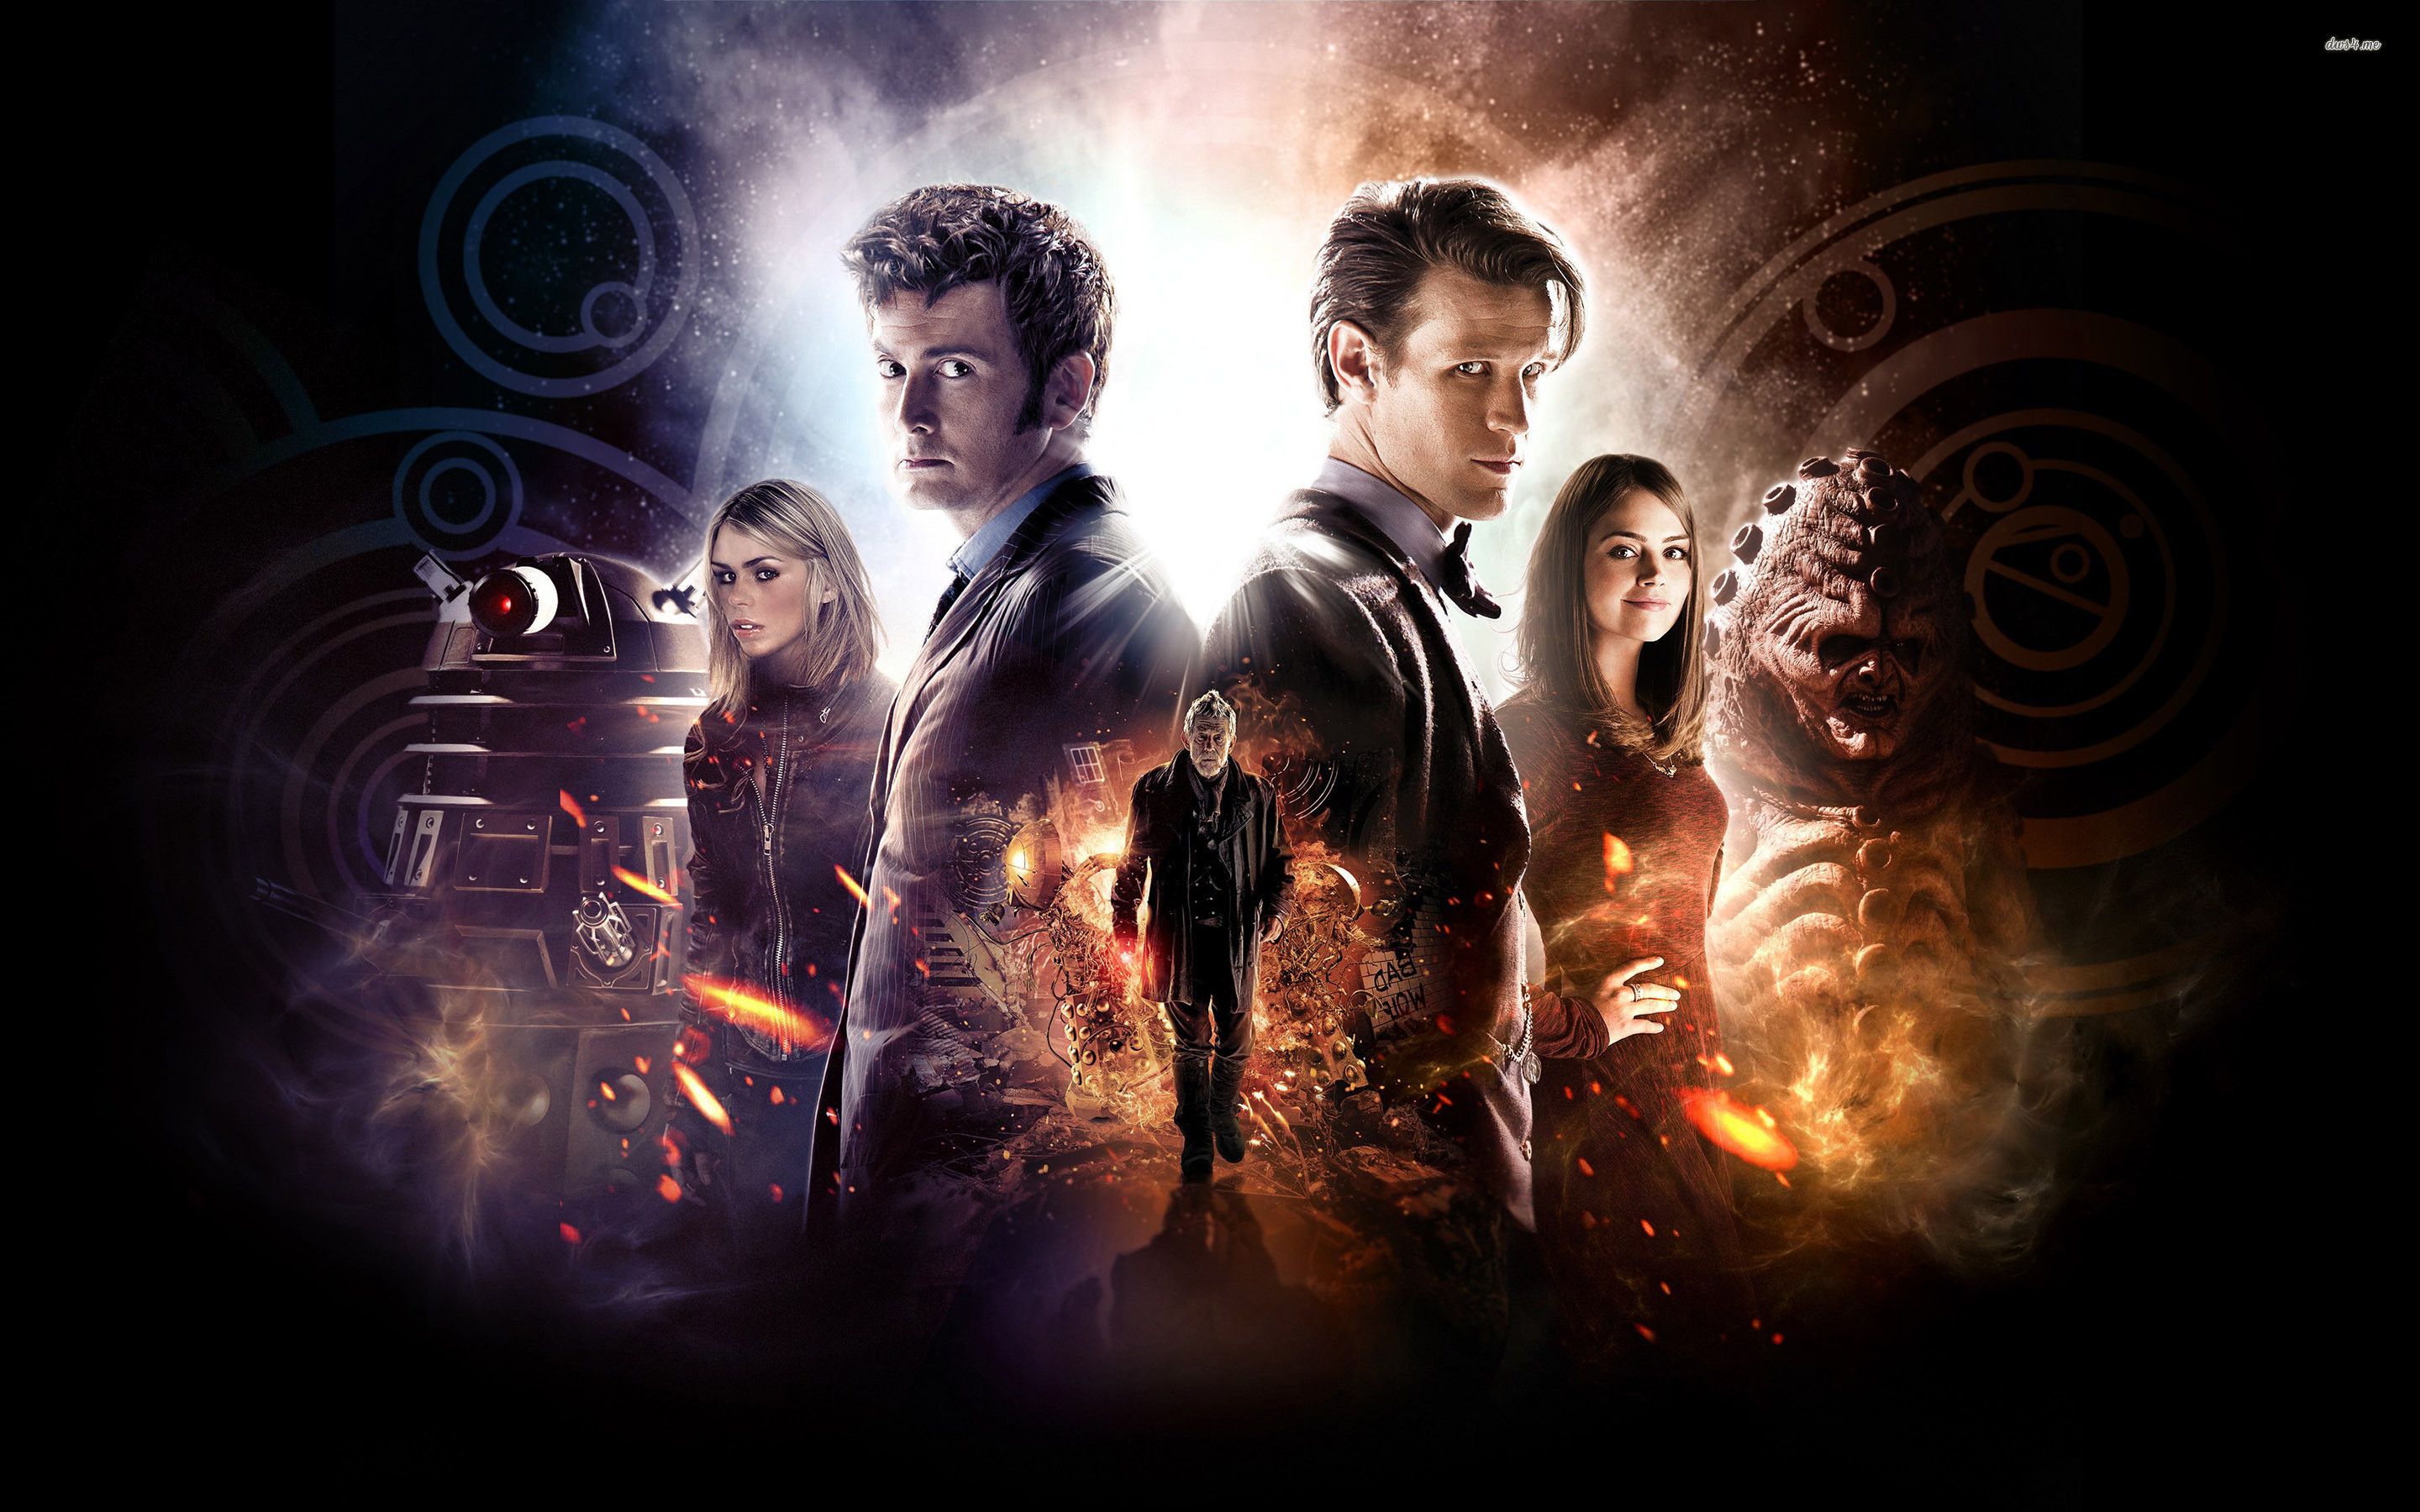 Doctor Who Wallpapers   Full HD wallpaper search 2880x1800